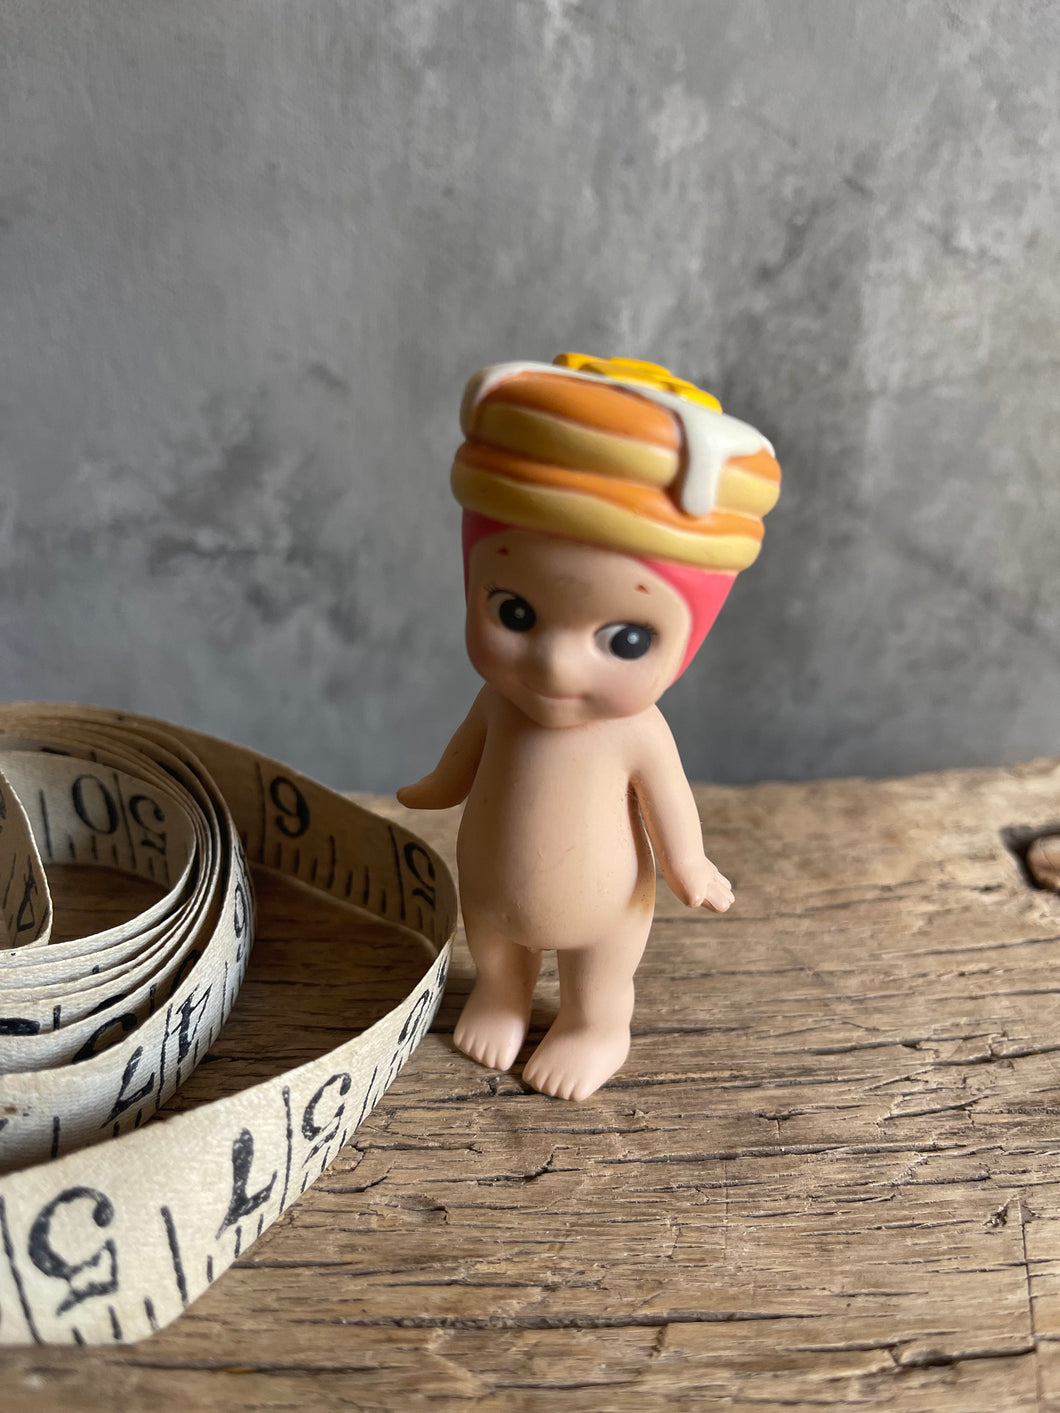 Authentic Child’s Kewpie Doll - Made in Japan.